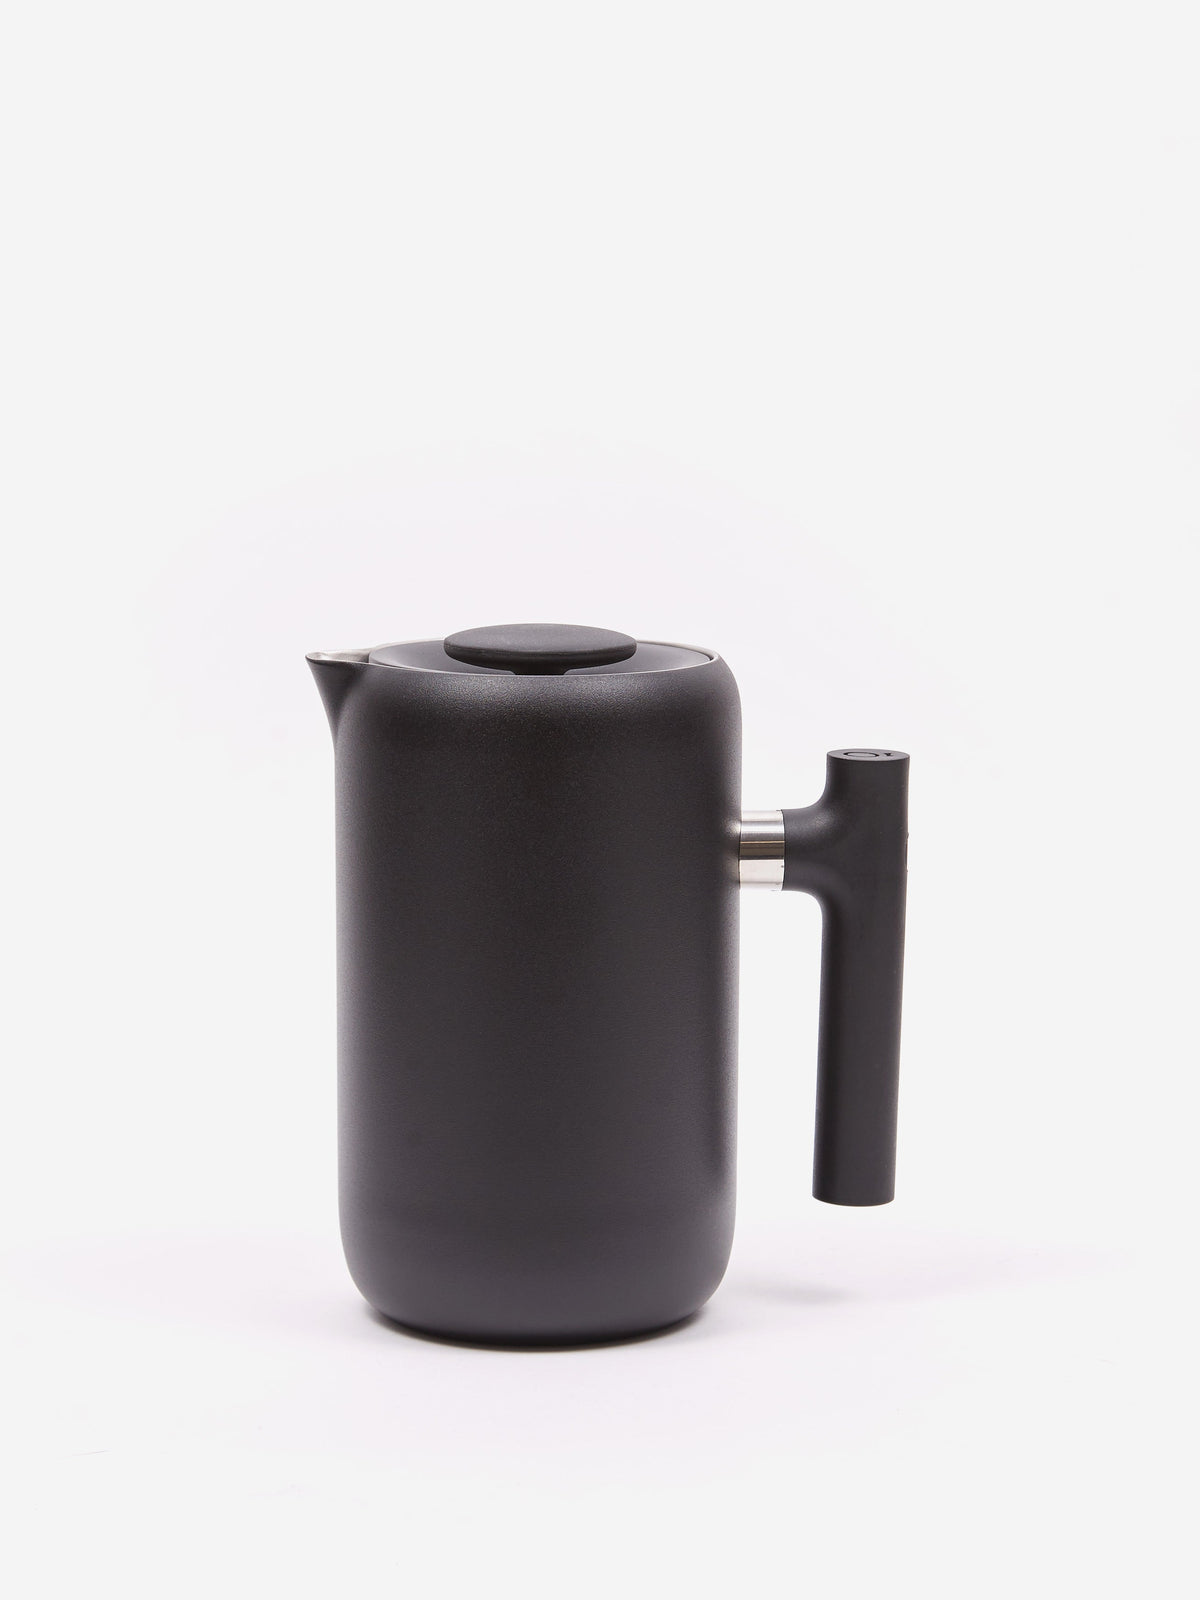 https://www.goodhoodstore.shop/wp-content/uploads/1691/99/explore-our-amazing-range-of-fellow-clara-french-press-black-fellow-unique-designs-that-you-wont-see-in-any-other-place_0.jpg